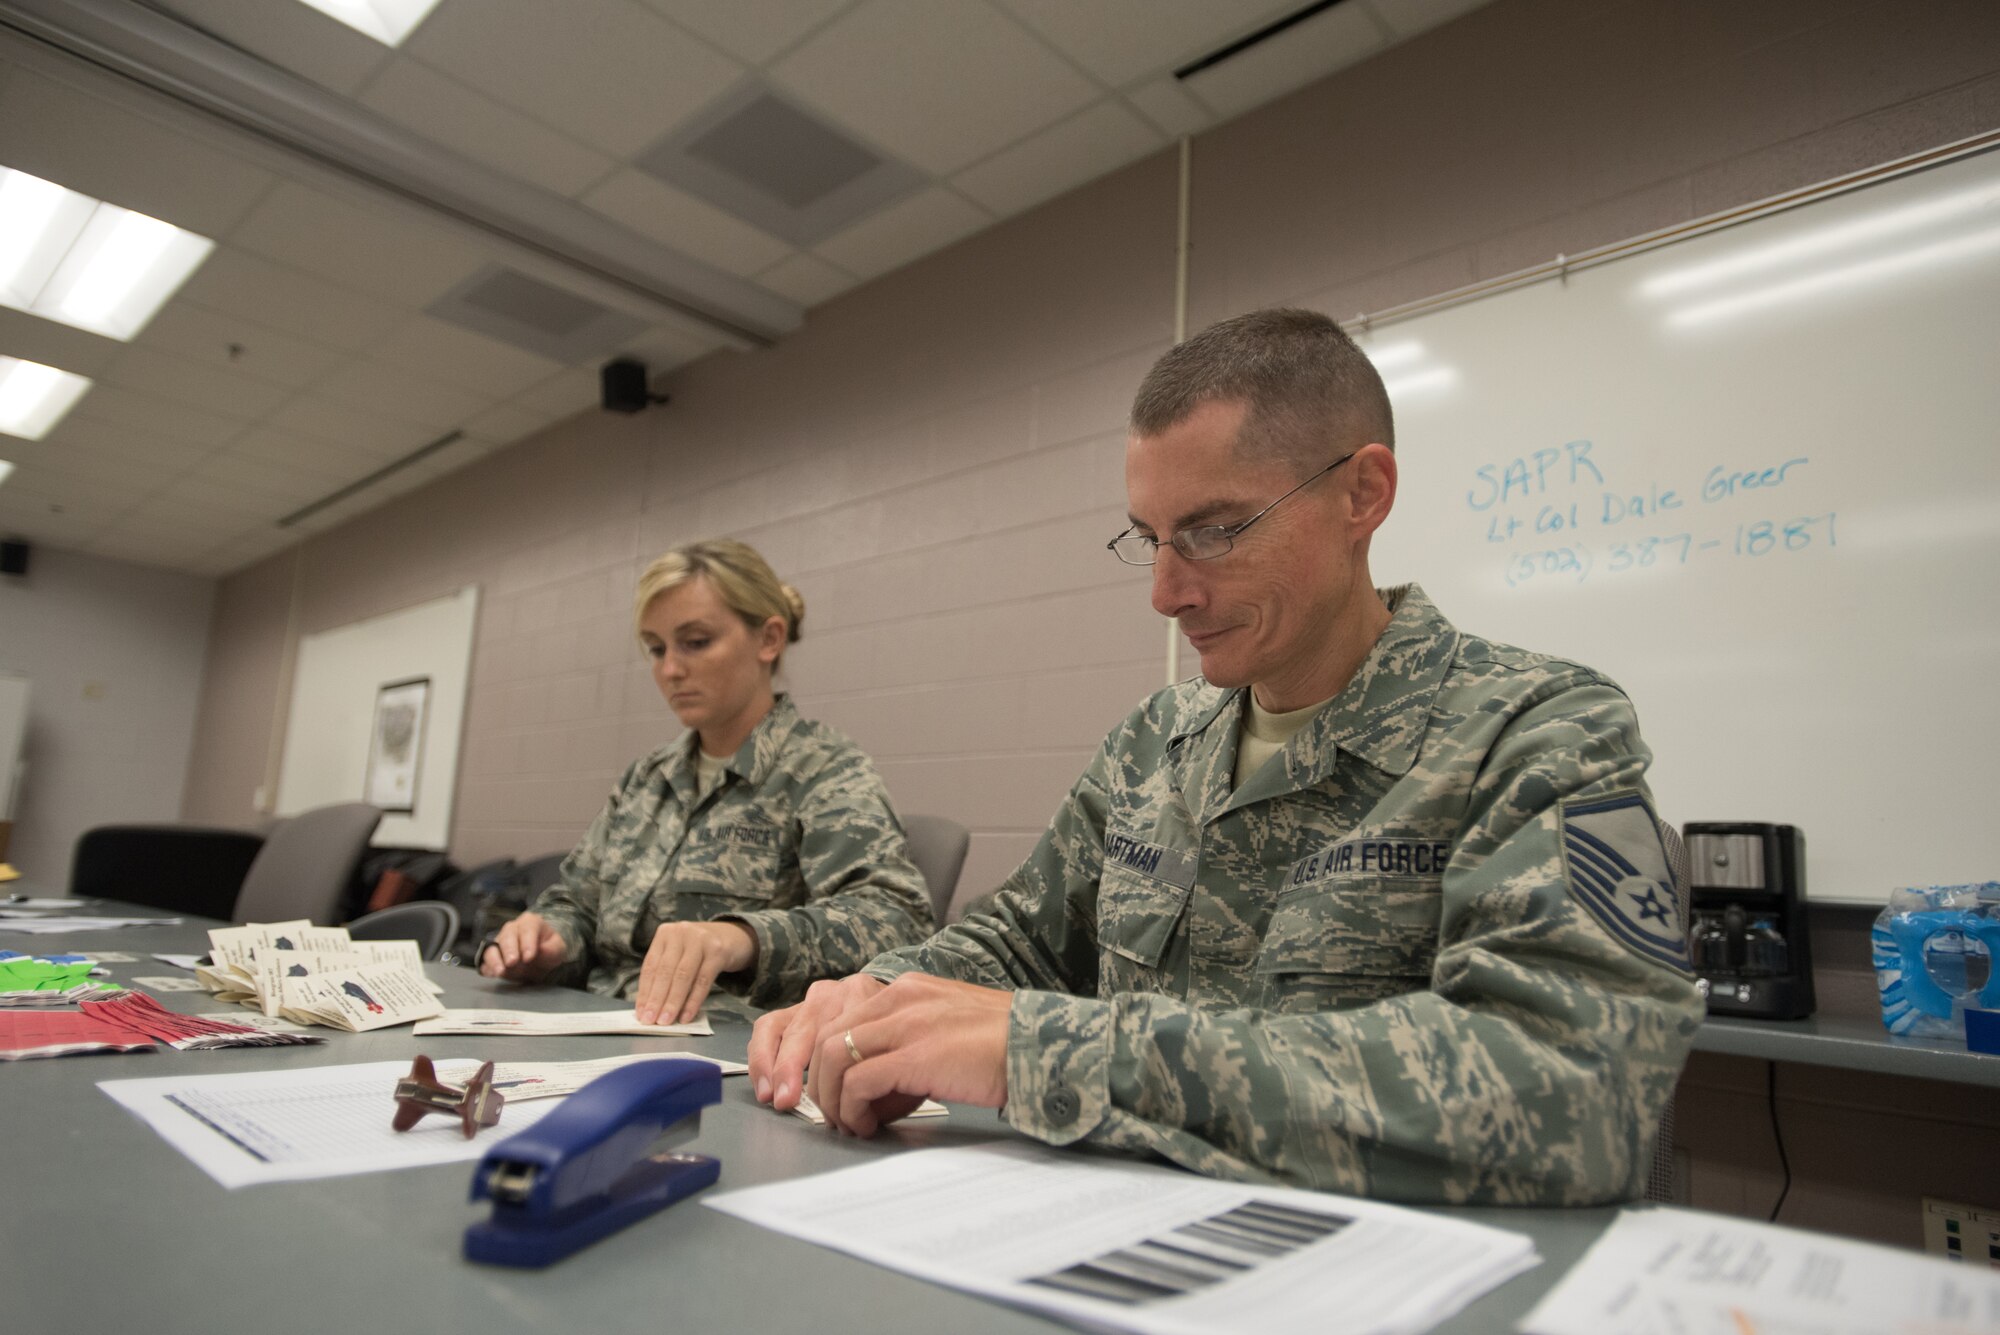 Master Sgt. Don Hartman (right) and Staff Sgt. Kayla Holt, personnel support specialists for the Kentucky Air National Guard’s 123rd Force Support Squadron, wait to in-process military members at Barkley Regional Airport in Paducah, Ky., July 16, 2016, in preparation for Bluegrass Medical Innovative Readiness Training. The program will offer medical and dental care at no cost to residents in three Western Kentucky locations from July 18 to 27. (U.S. Air National Guard photo by Master Sgt. Phil Speck)